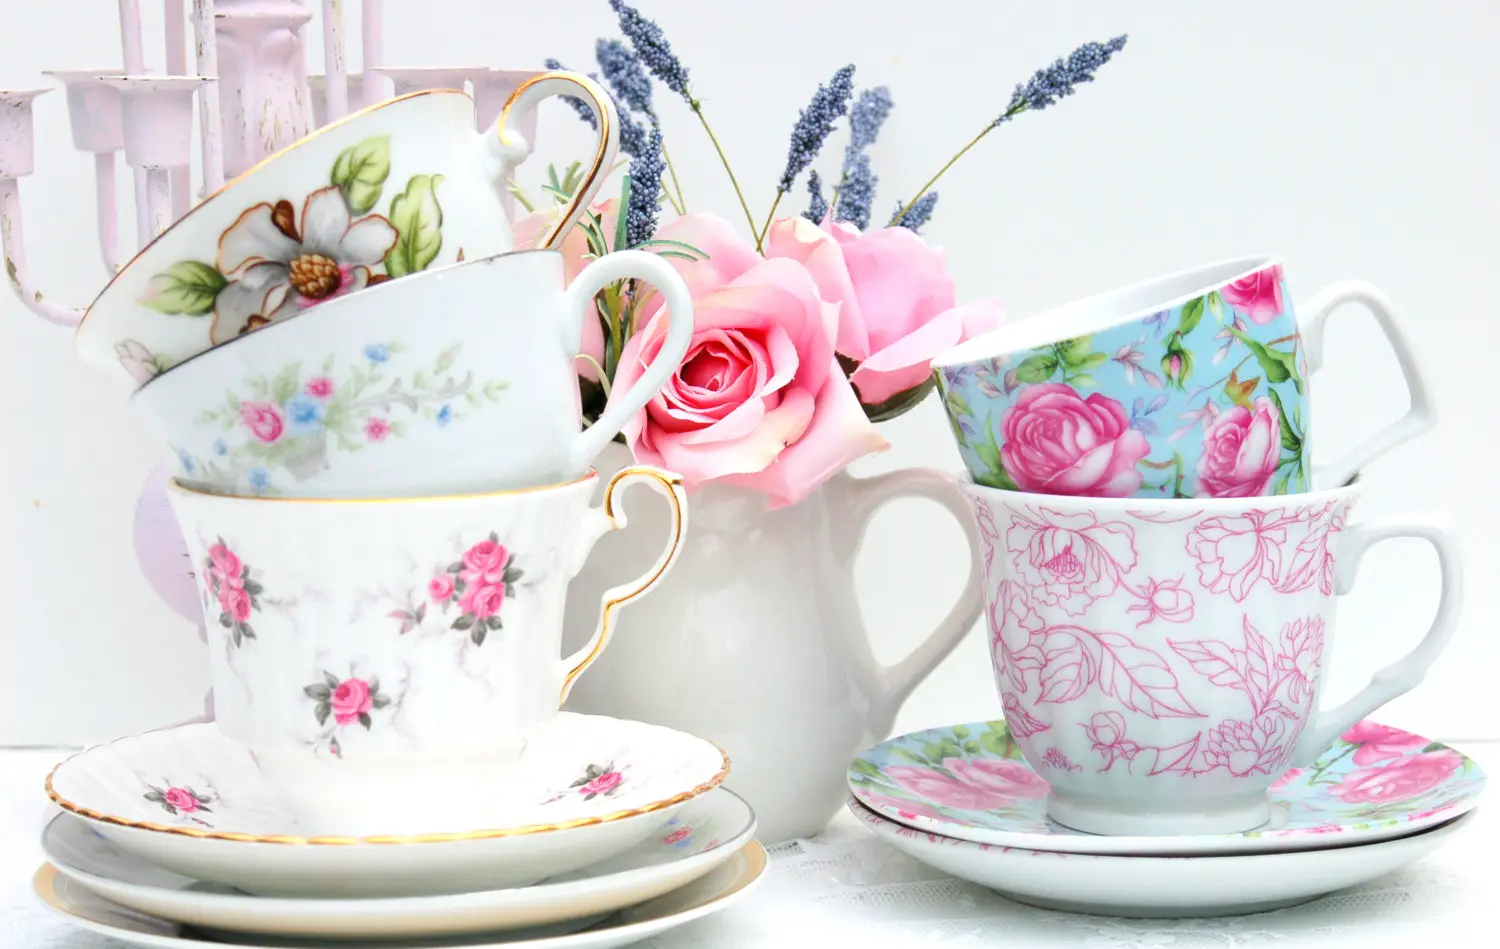 mismatched wedding china tea cups and saucers